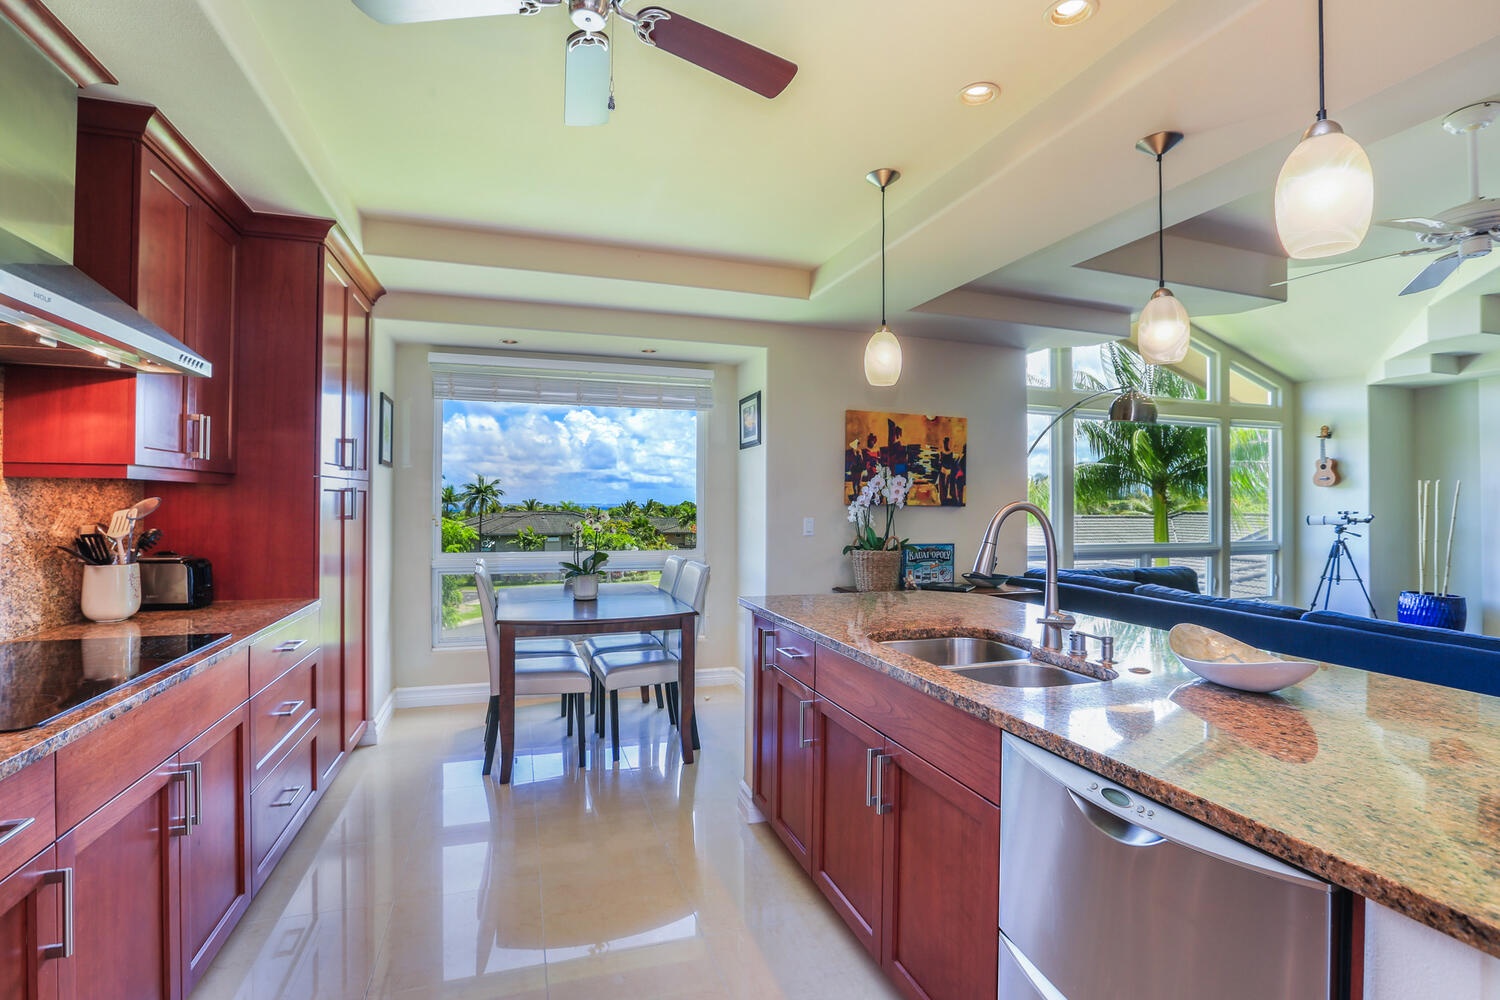 Princeville Vacation Rentals, Noelani Kai - A roomy kitchen area with ample appliances and tools, dining table with four seats, and a view!